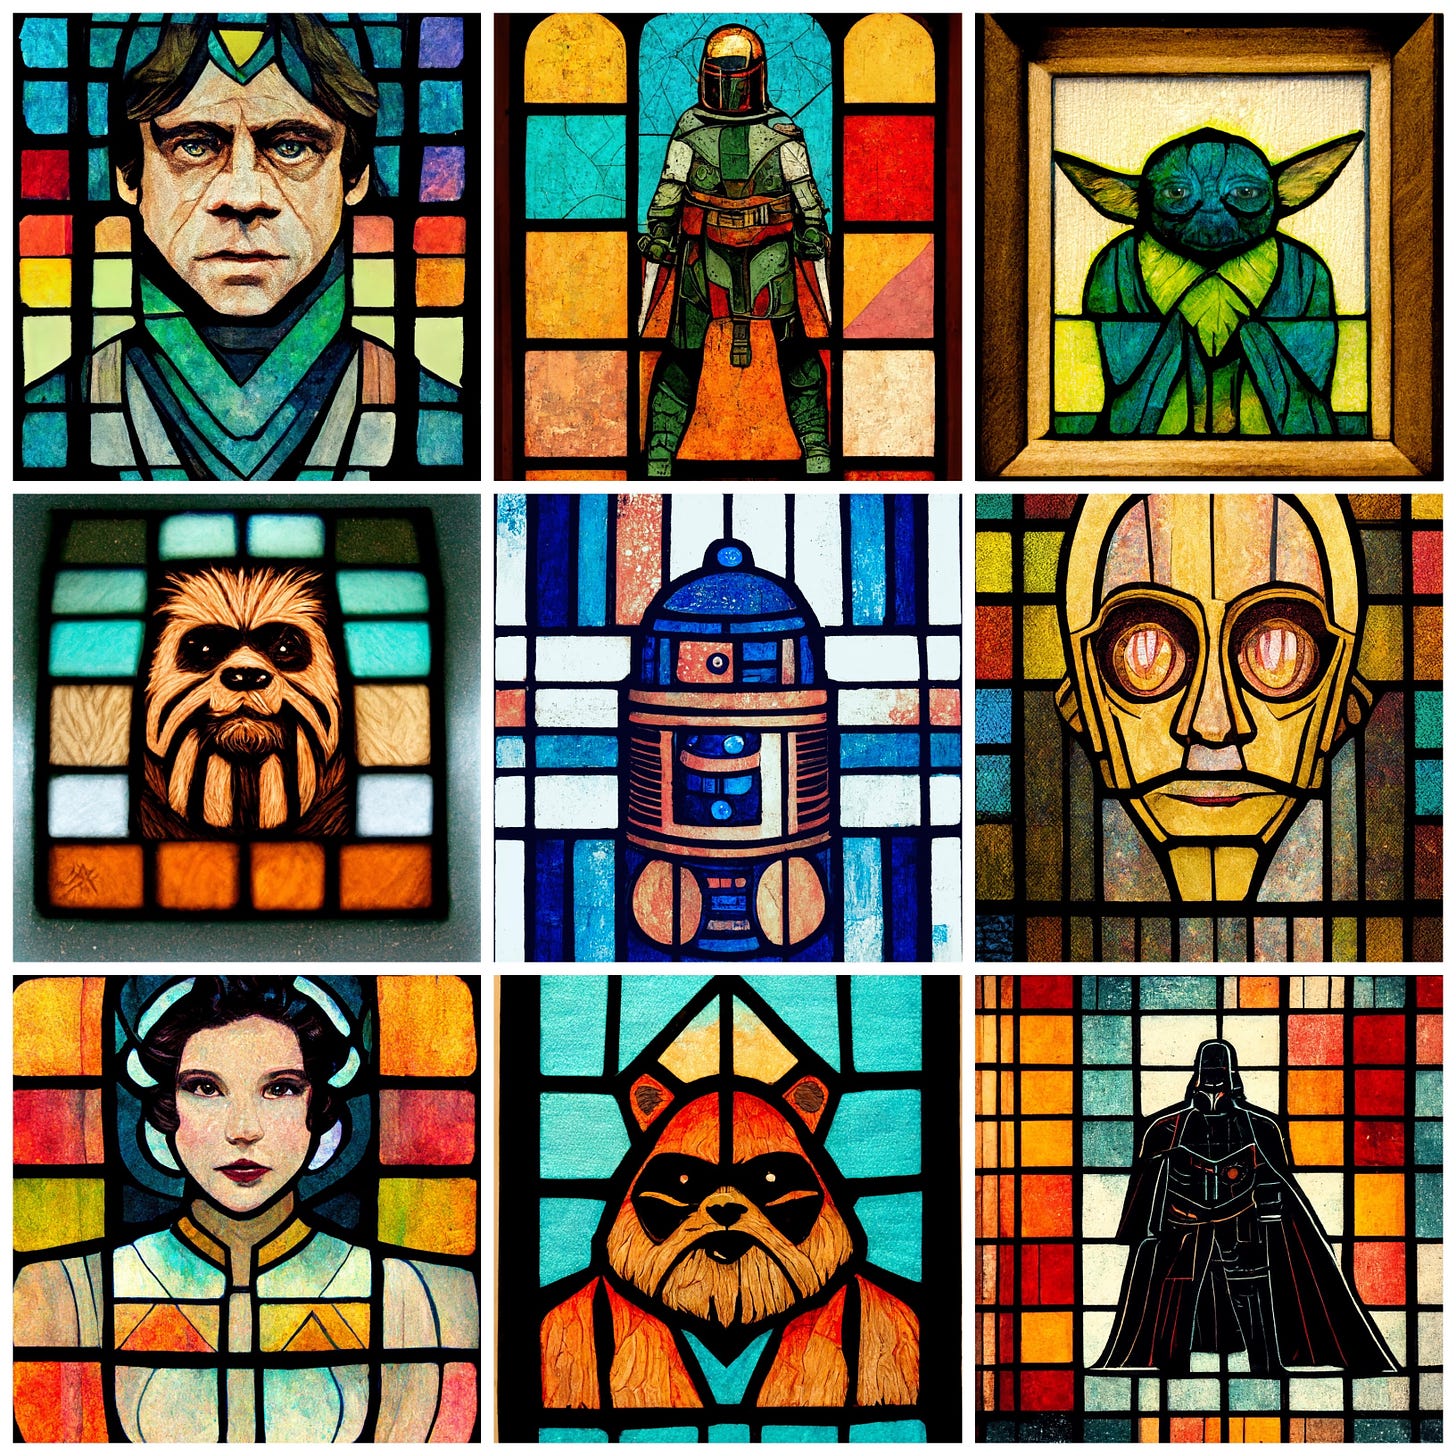 A nine panel collection of images rendered with midjourney all showing Star Wars characters depicted as stained glass windows.